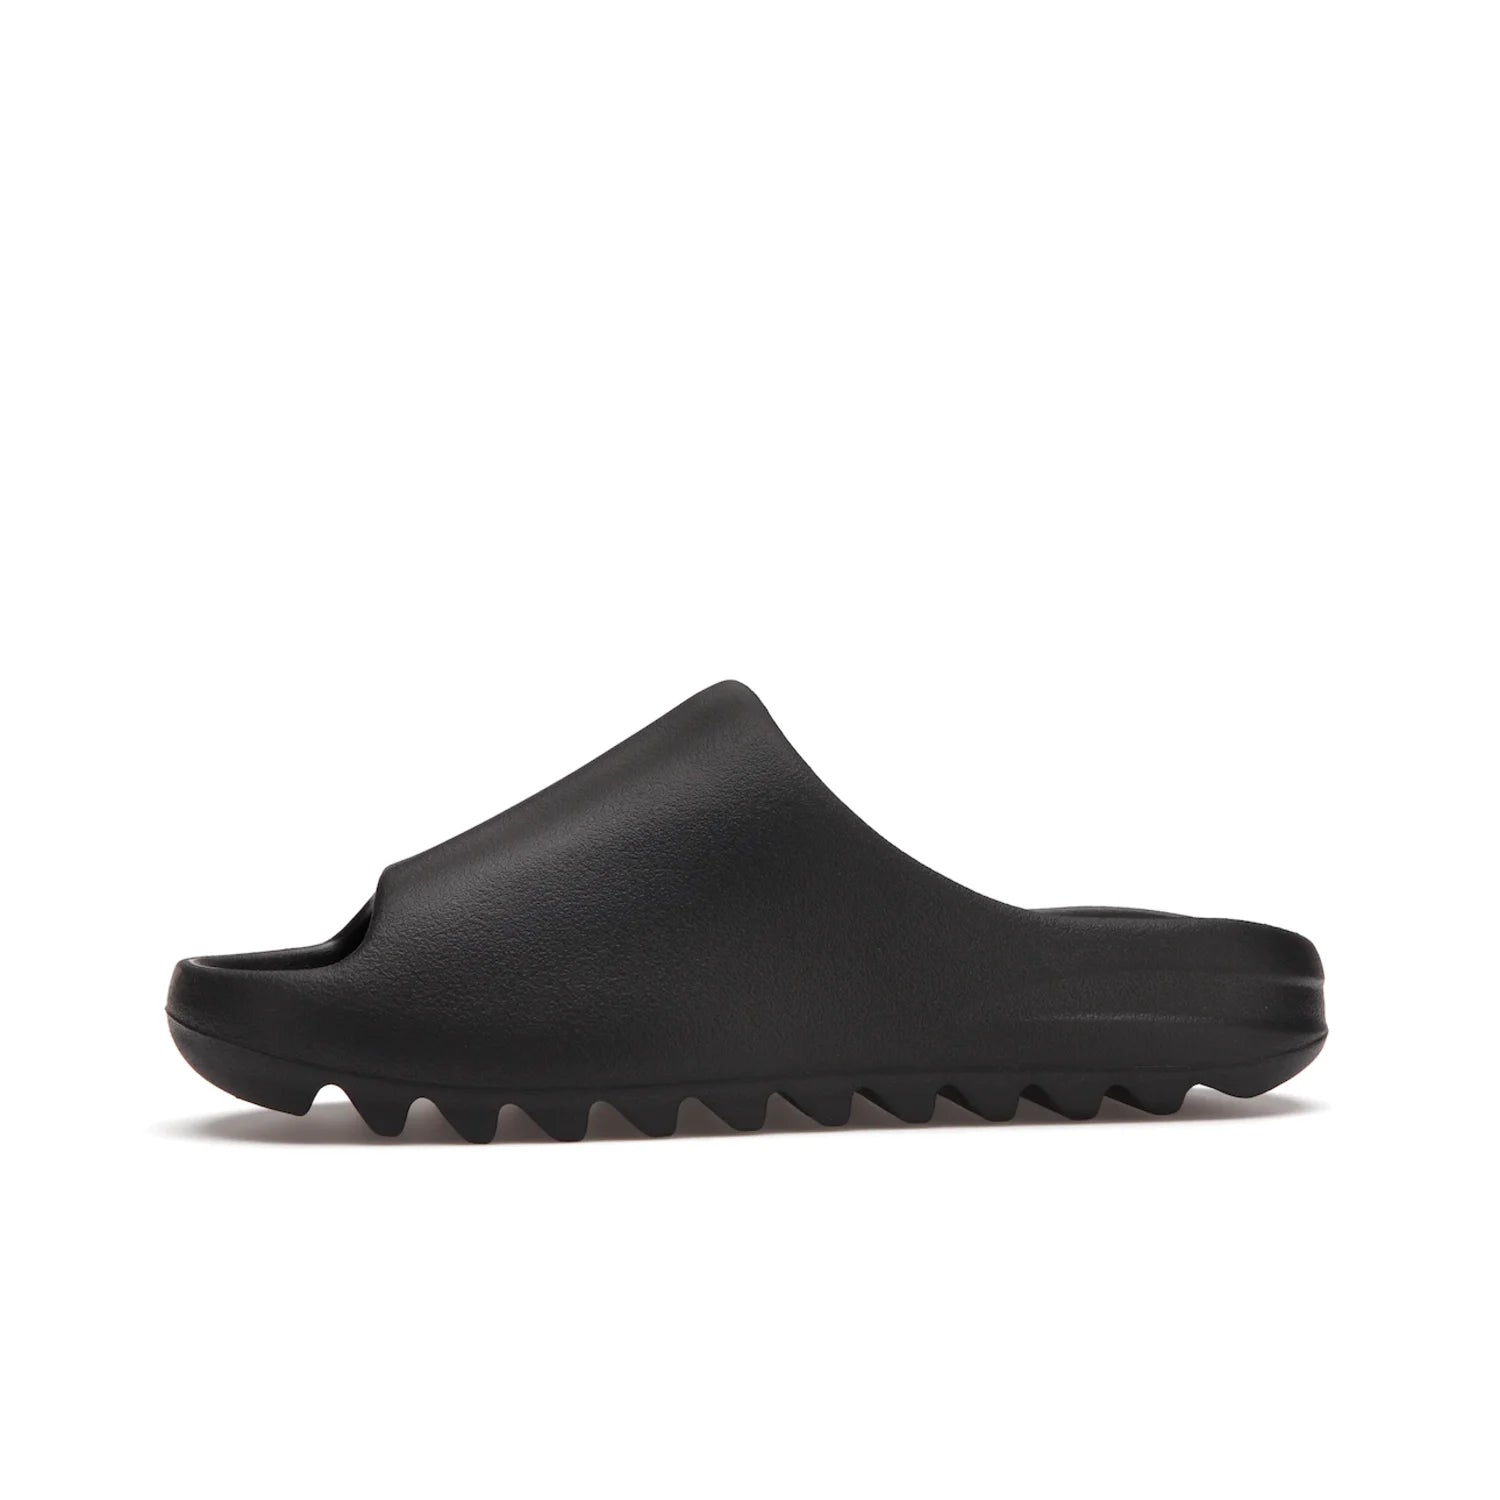 adidas Yeezy Slide Onyx - Image 18 - Only at www.BallersClubKickz.com - Step into comfort and style with the adidas Yeezy Slide Onyx. Featuring foam construction, an all-black colorway and a grooved outsole for stability and responsiveness, this versatile slide is a must-have for your collection.